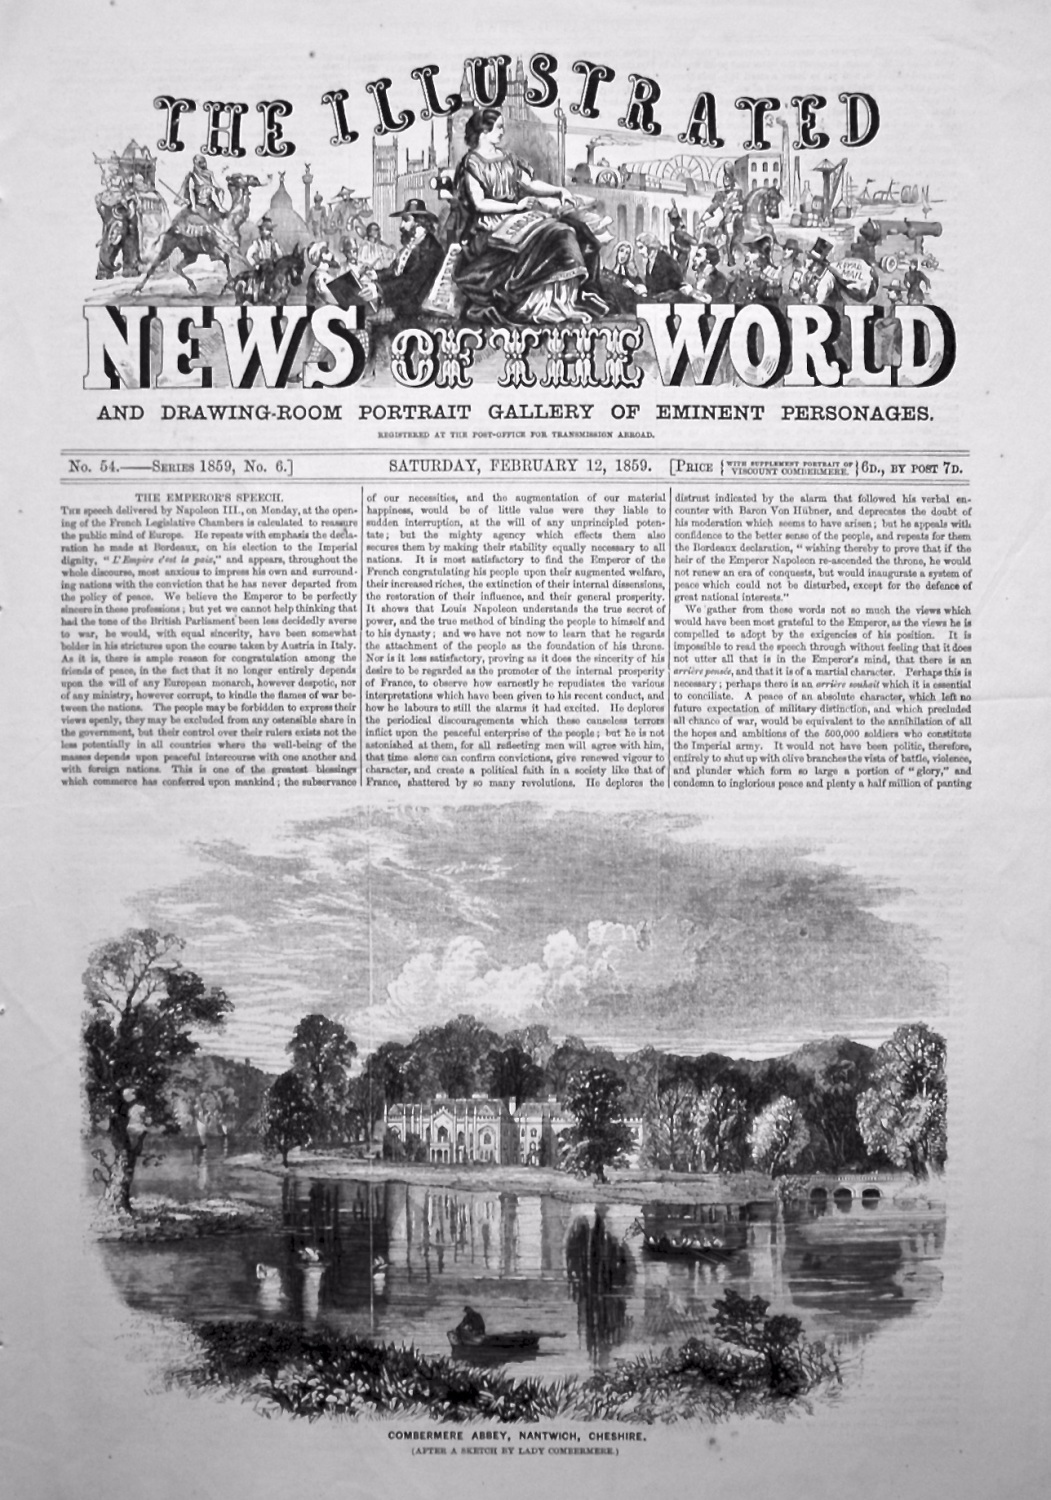 The Illustrated News of the World, February 12th, 1859.